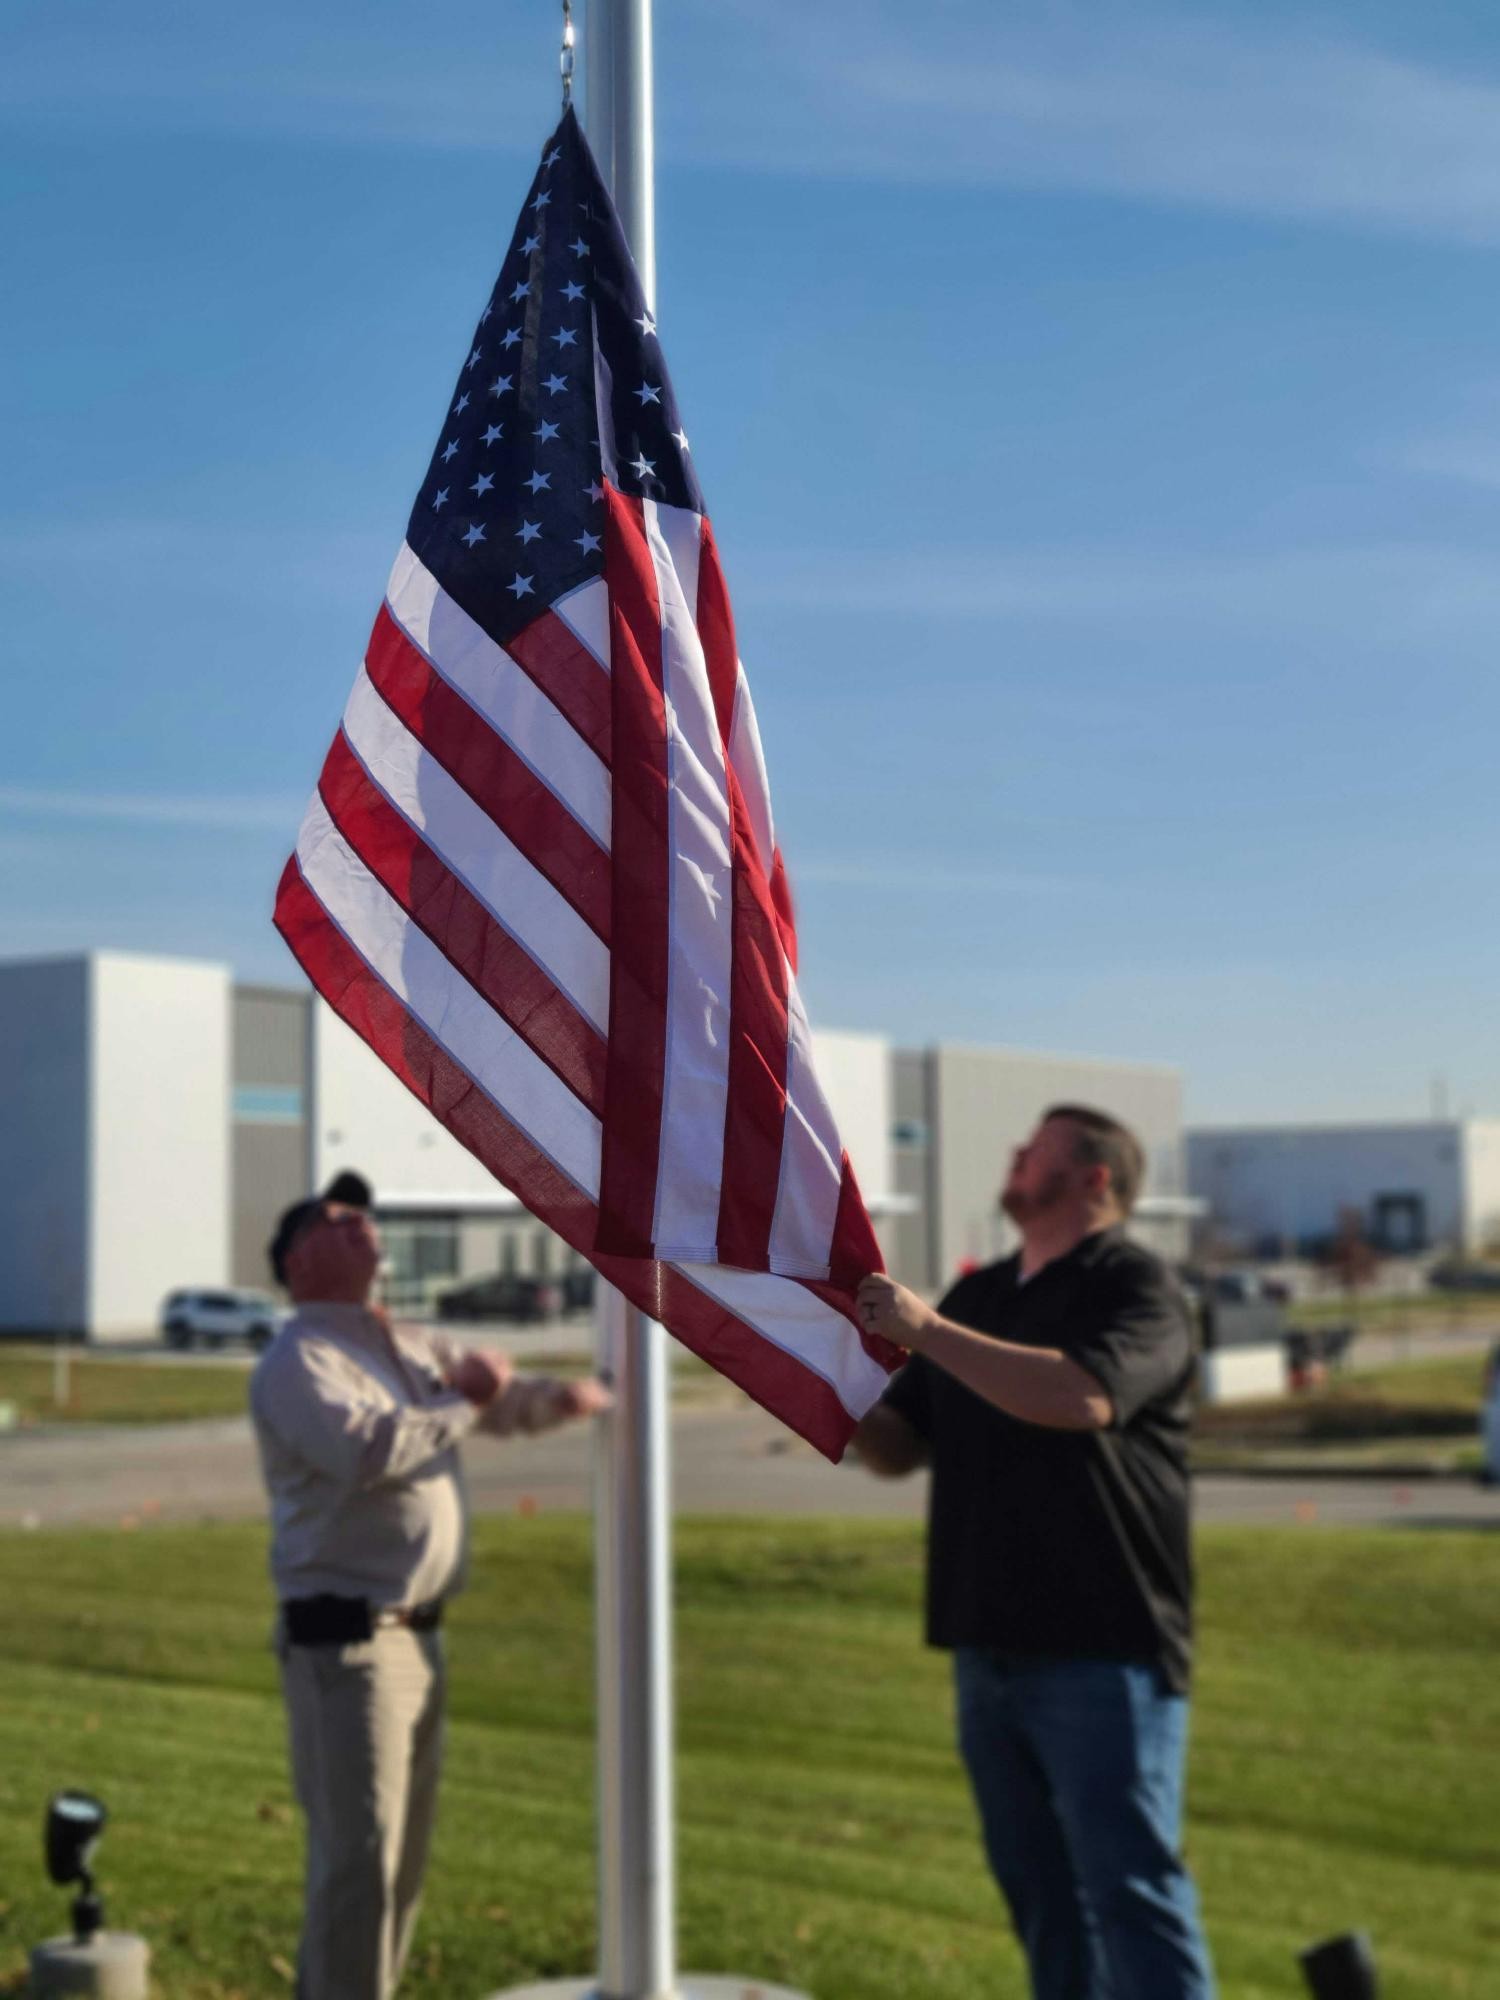 CCR VETS Group hosted a flag raising ceremony for newly installed flag pole at headquarters location.